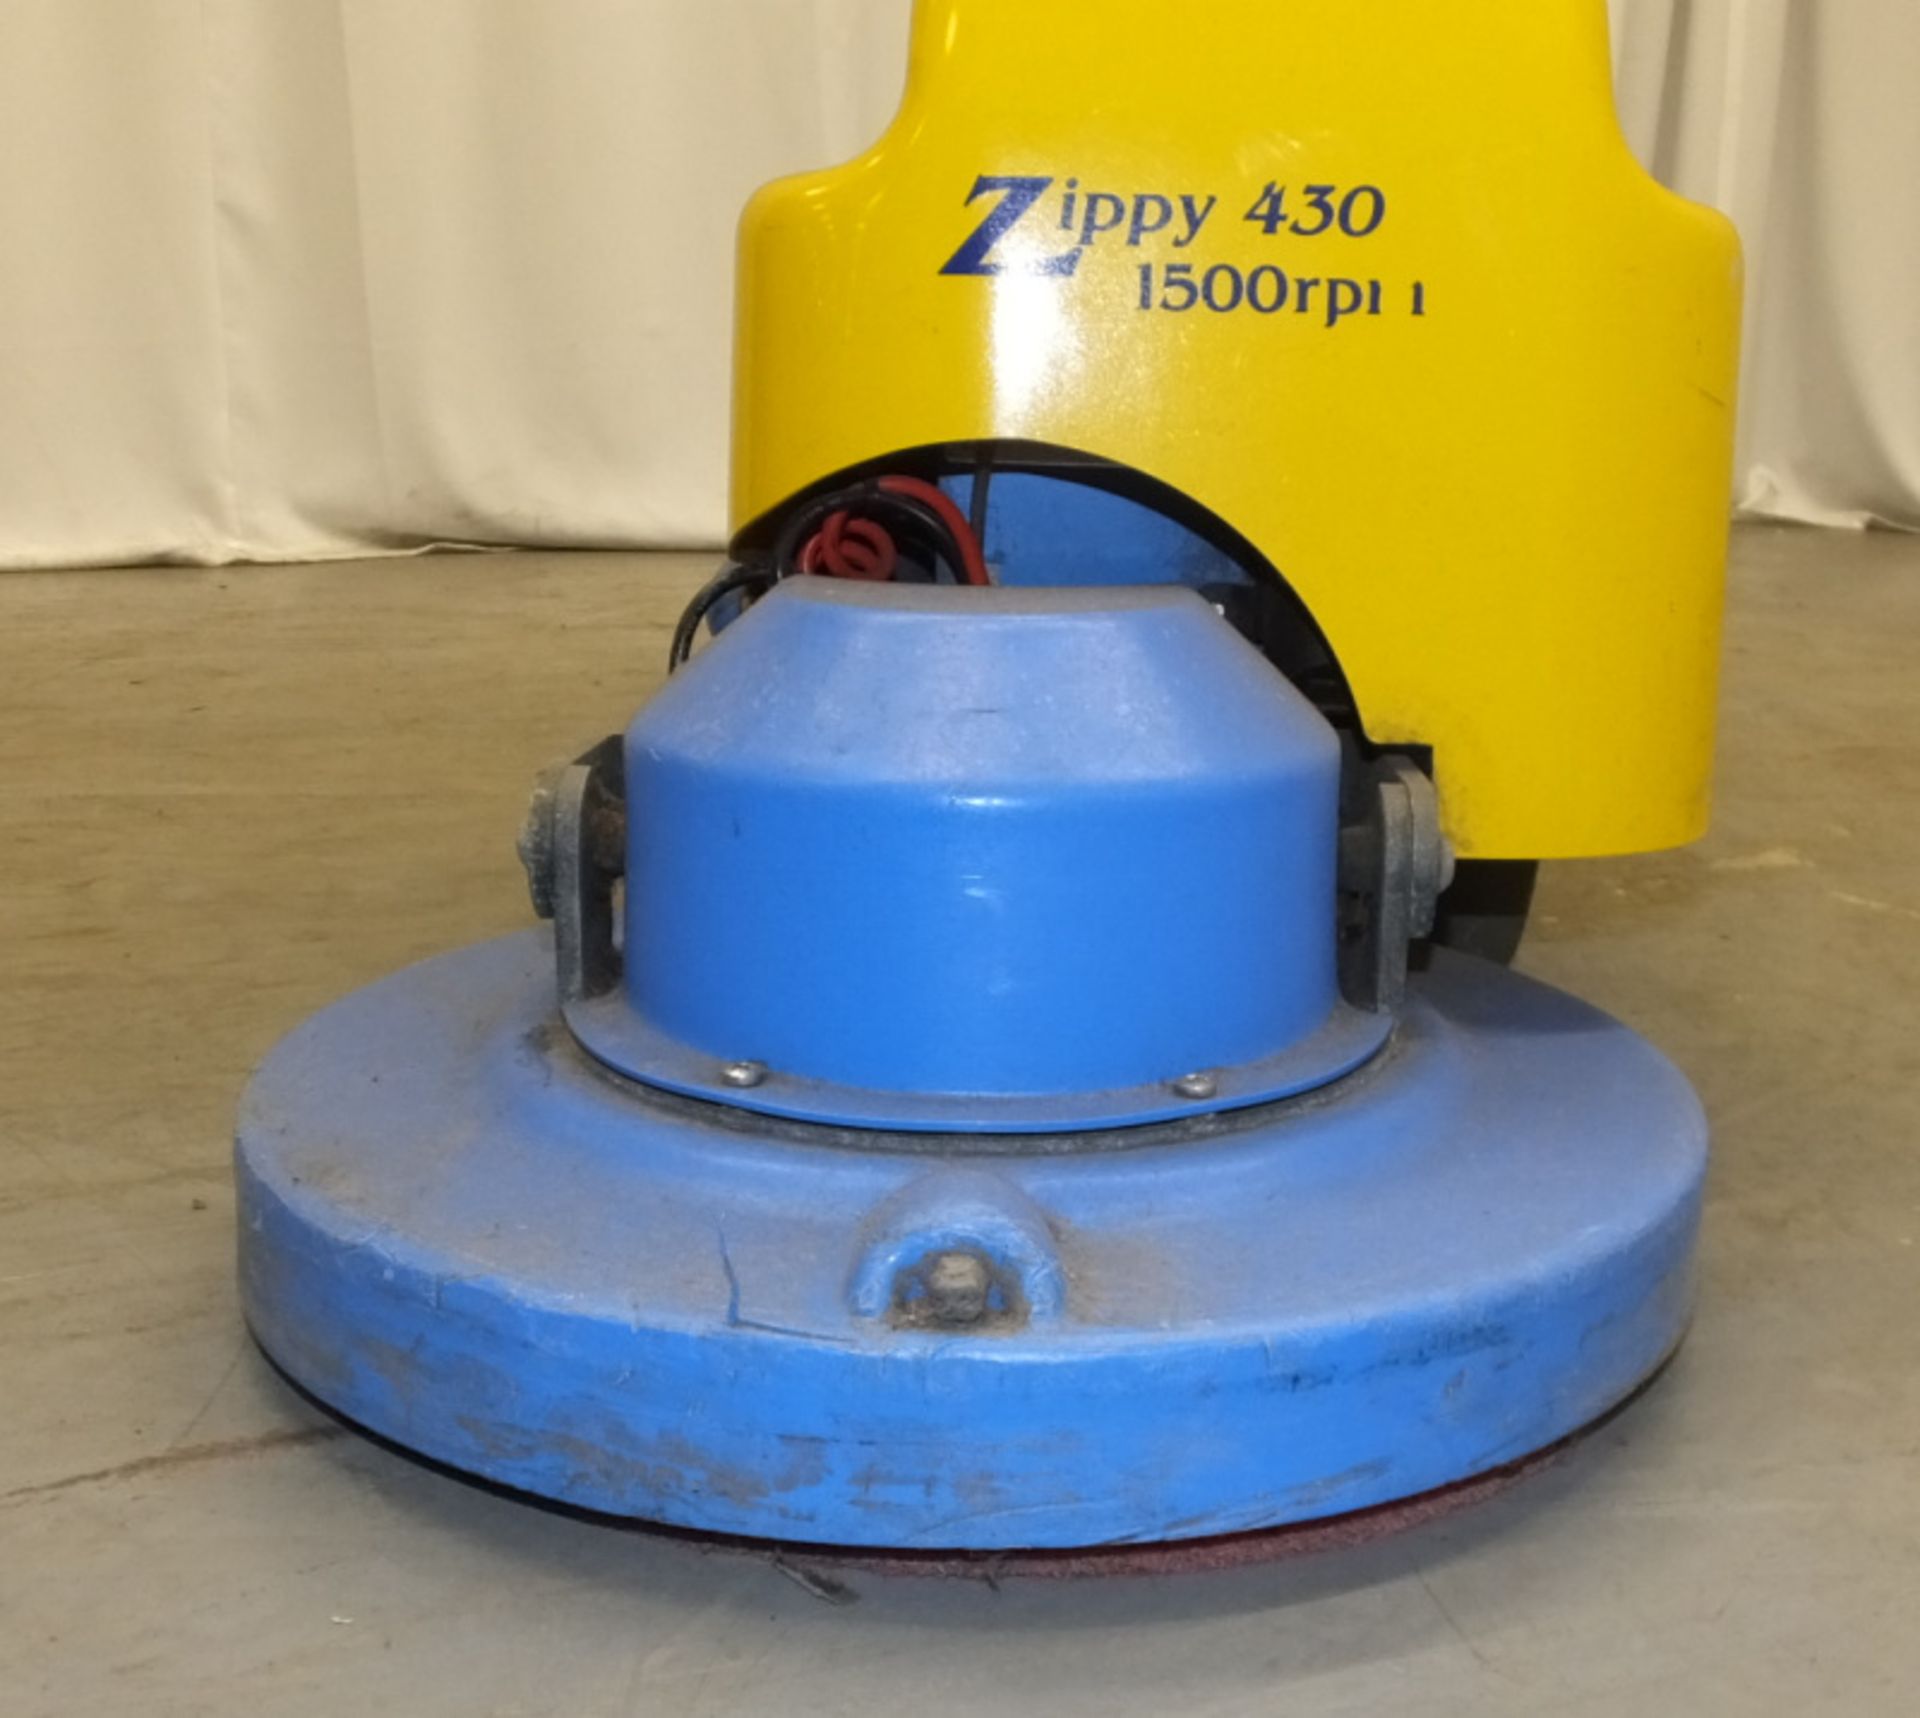 Tennant Challenger Zippy 430 Walk-Behind Floor Cleaner - has key but doesn't power up - cracked case - Image 3 of 8